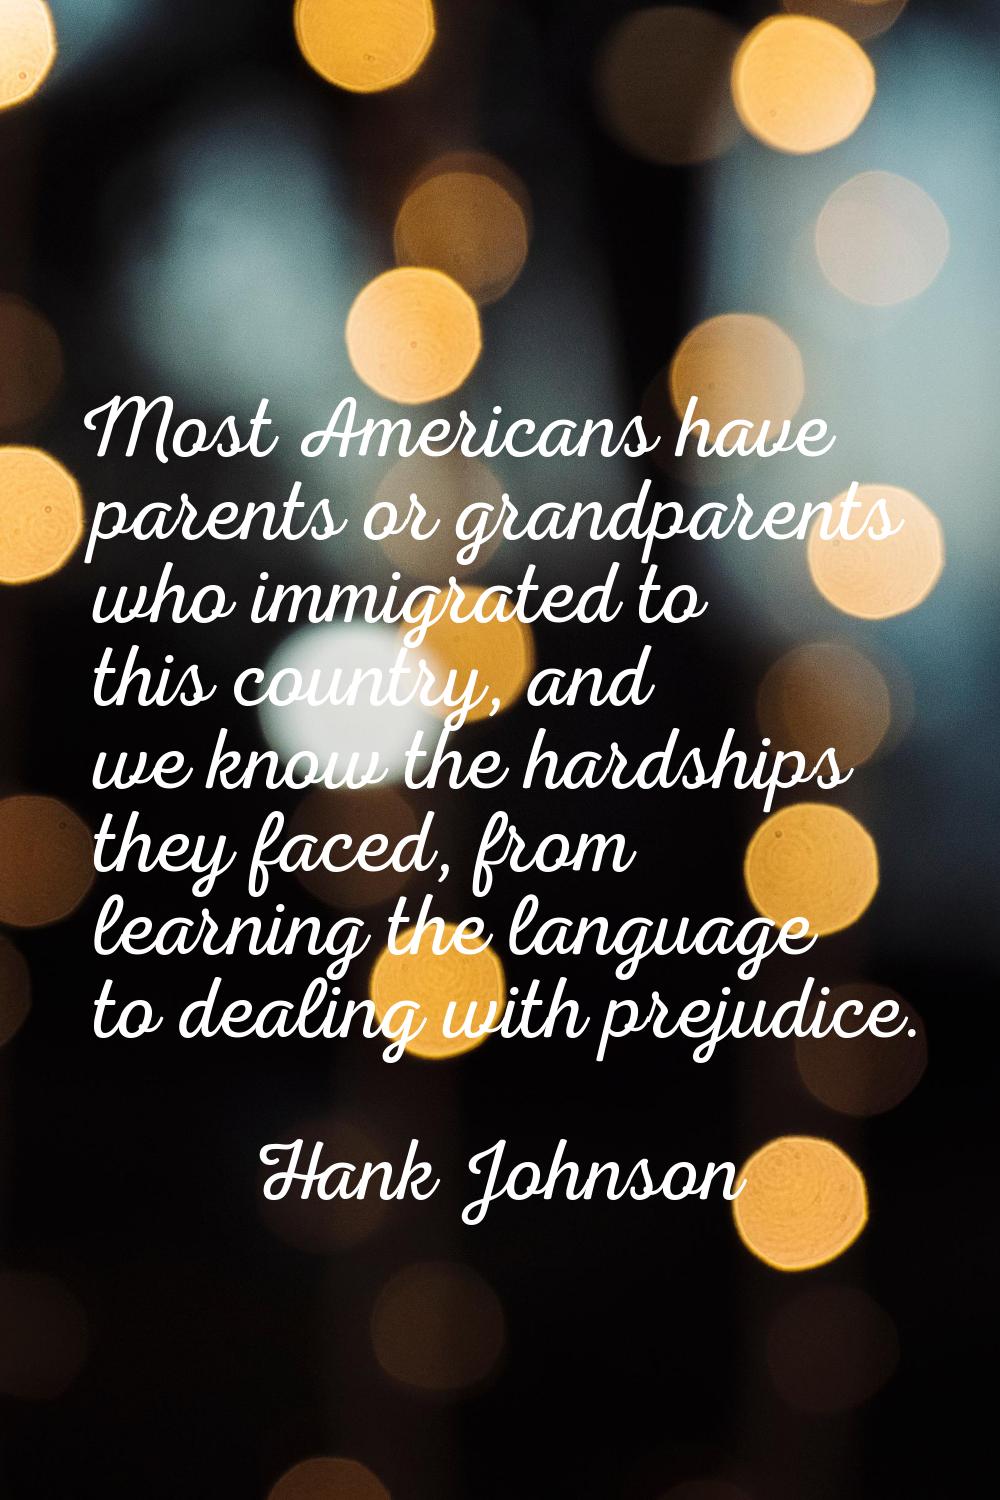 Most Americans have parents or grandparents who immigrated to this country, and we know the hardshi